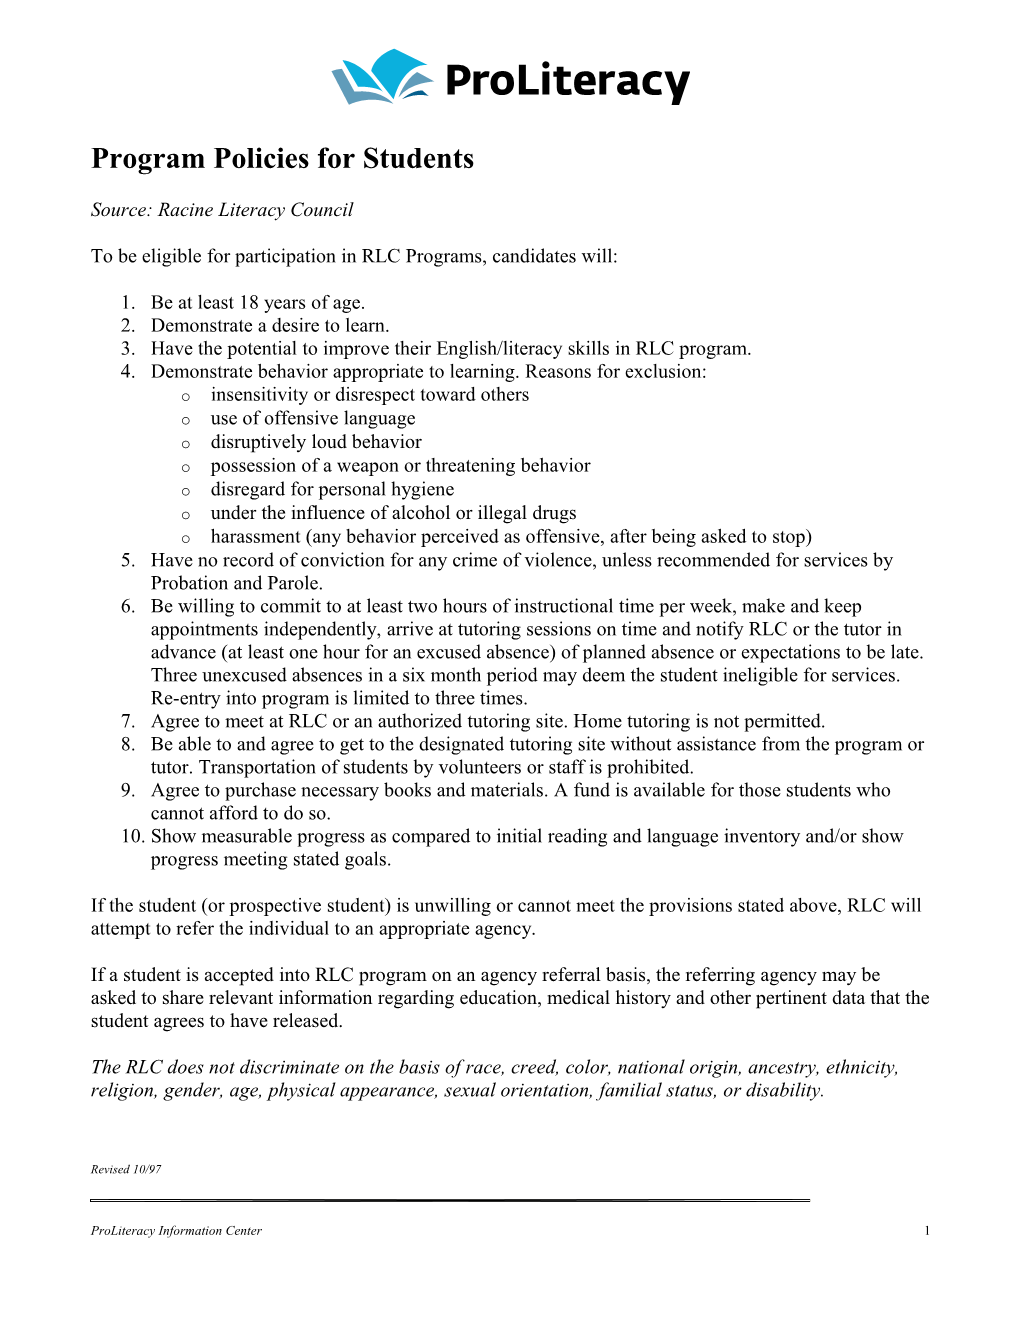 Racine Literacy Council Program Policies for Students